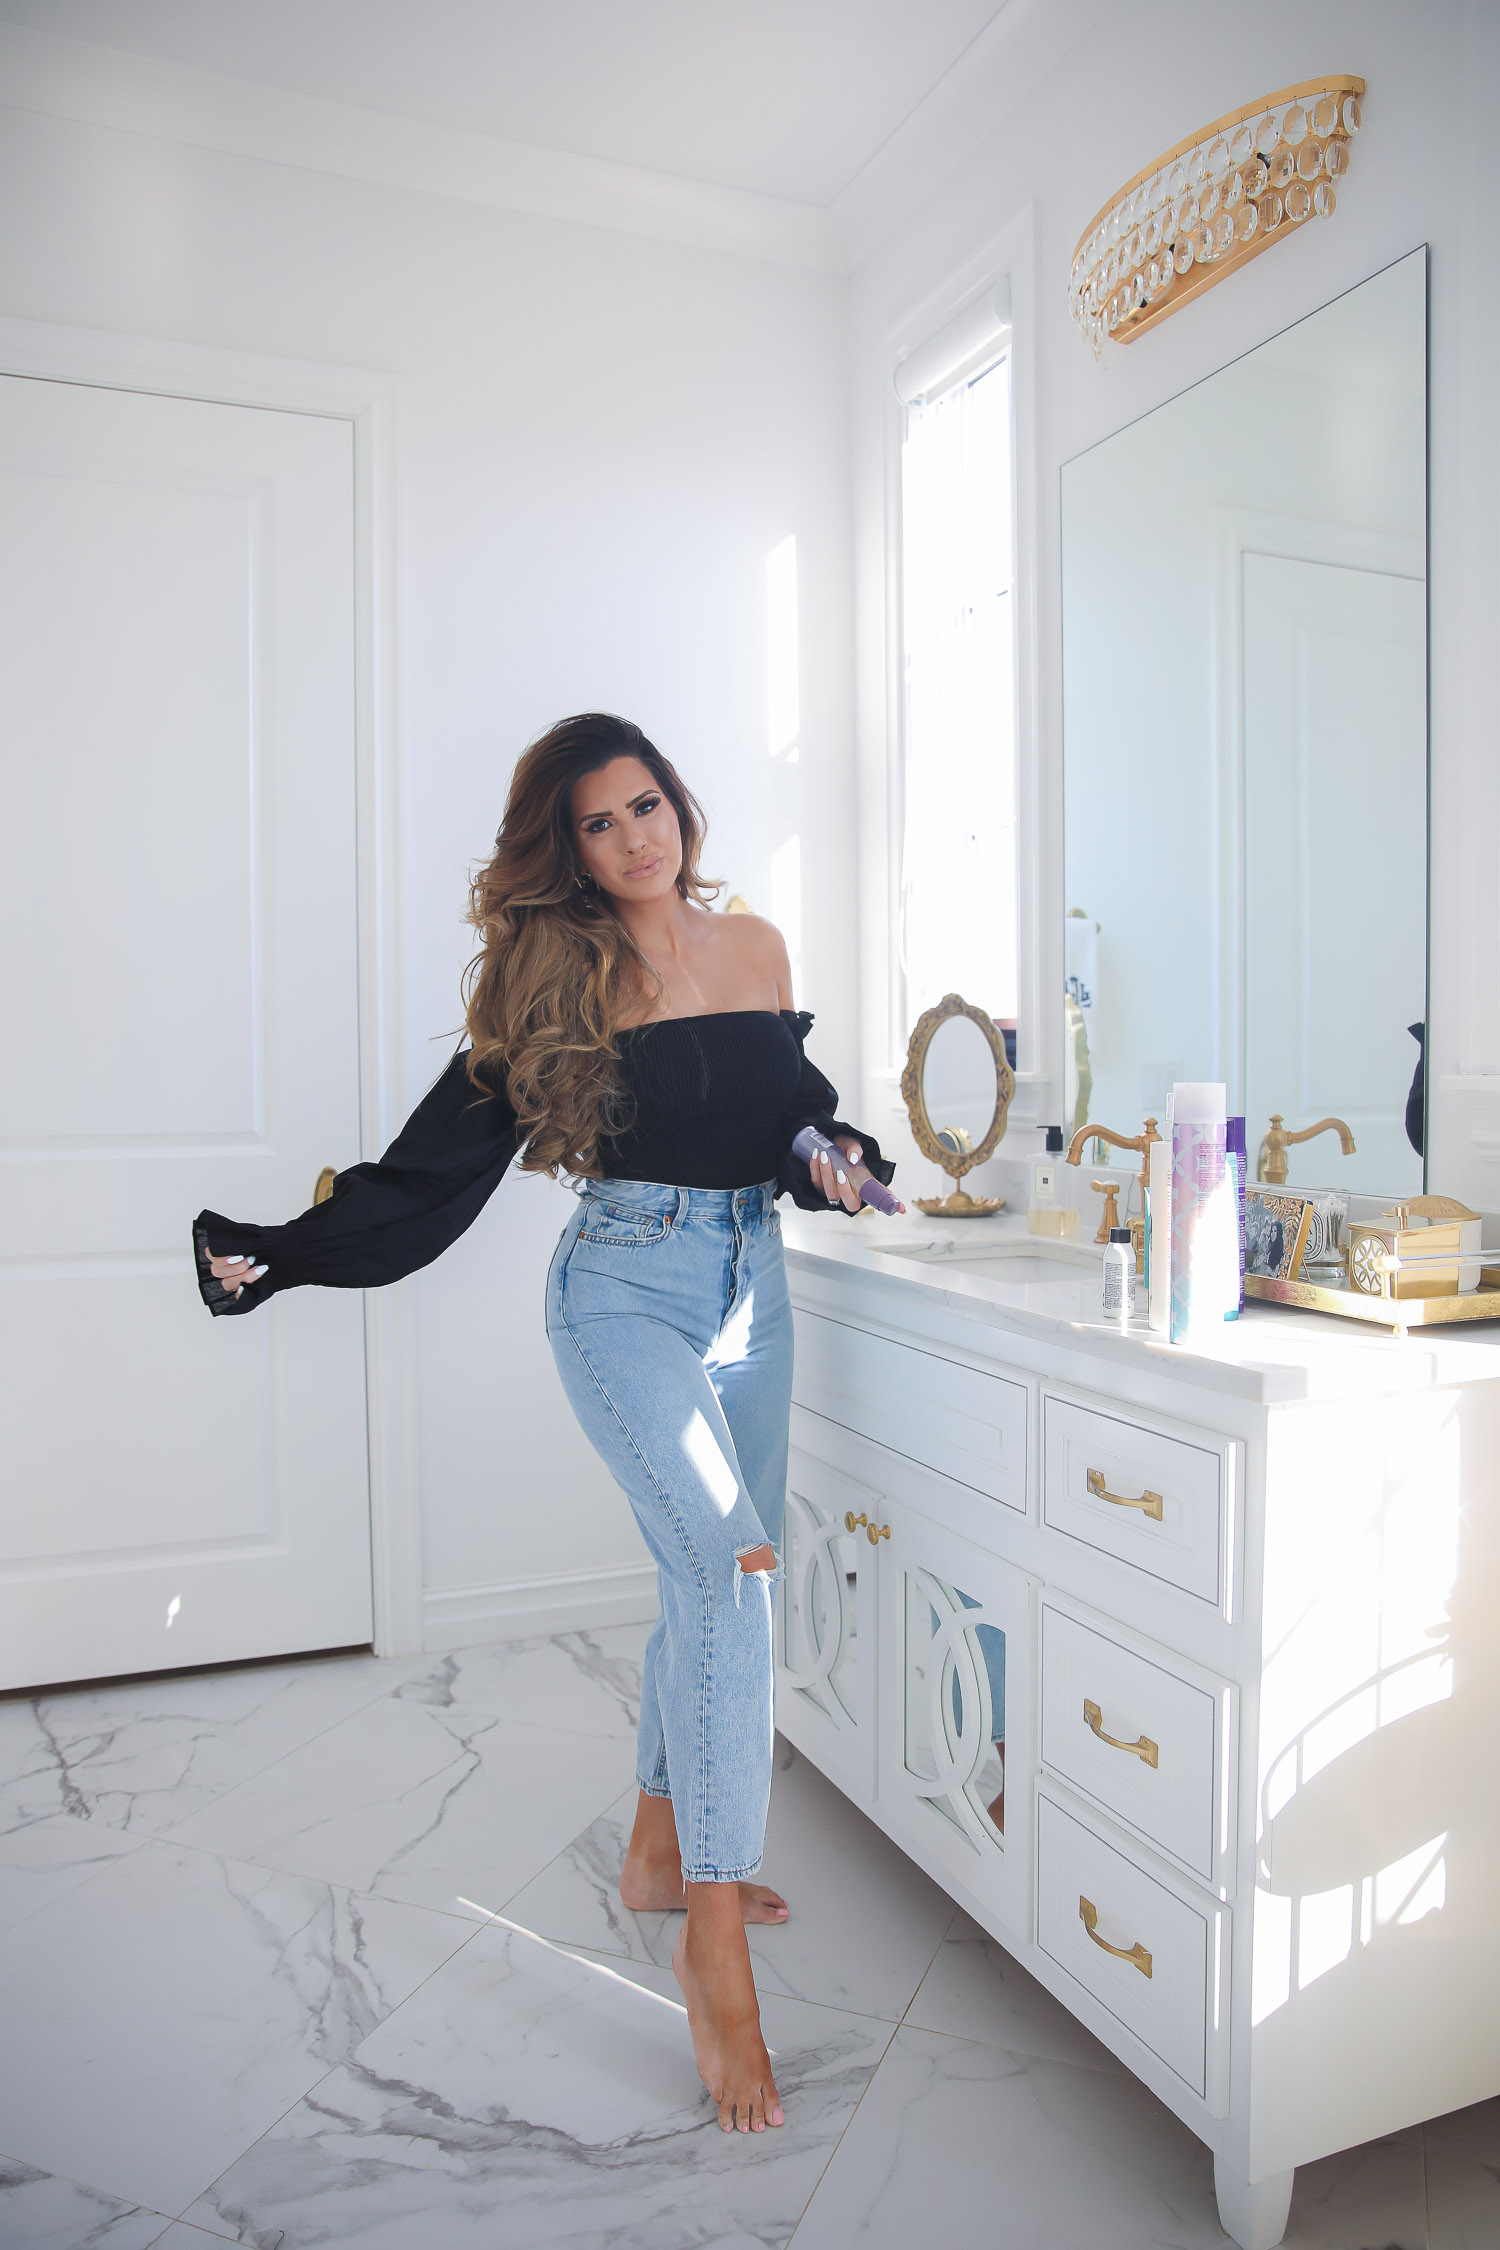 hair dot com, best hair products for long hair and extensions, Purology shampoo and conditioner, emily gemma, the sweetest thing blog |Hair Products by popular US beauty blog, The Sweetest Thing: image of Emily Gemma standing in her bathroom and wearing a black off the shoulder top, high waisted light denim jeans, and holding a bottle of Purology hair product in her hand. 